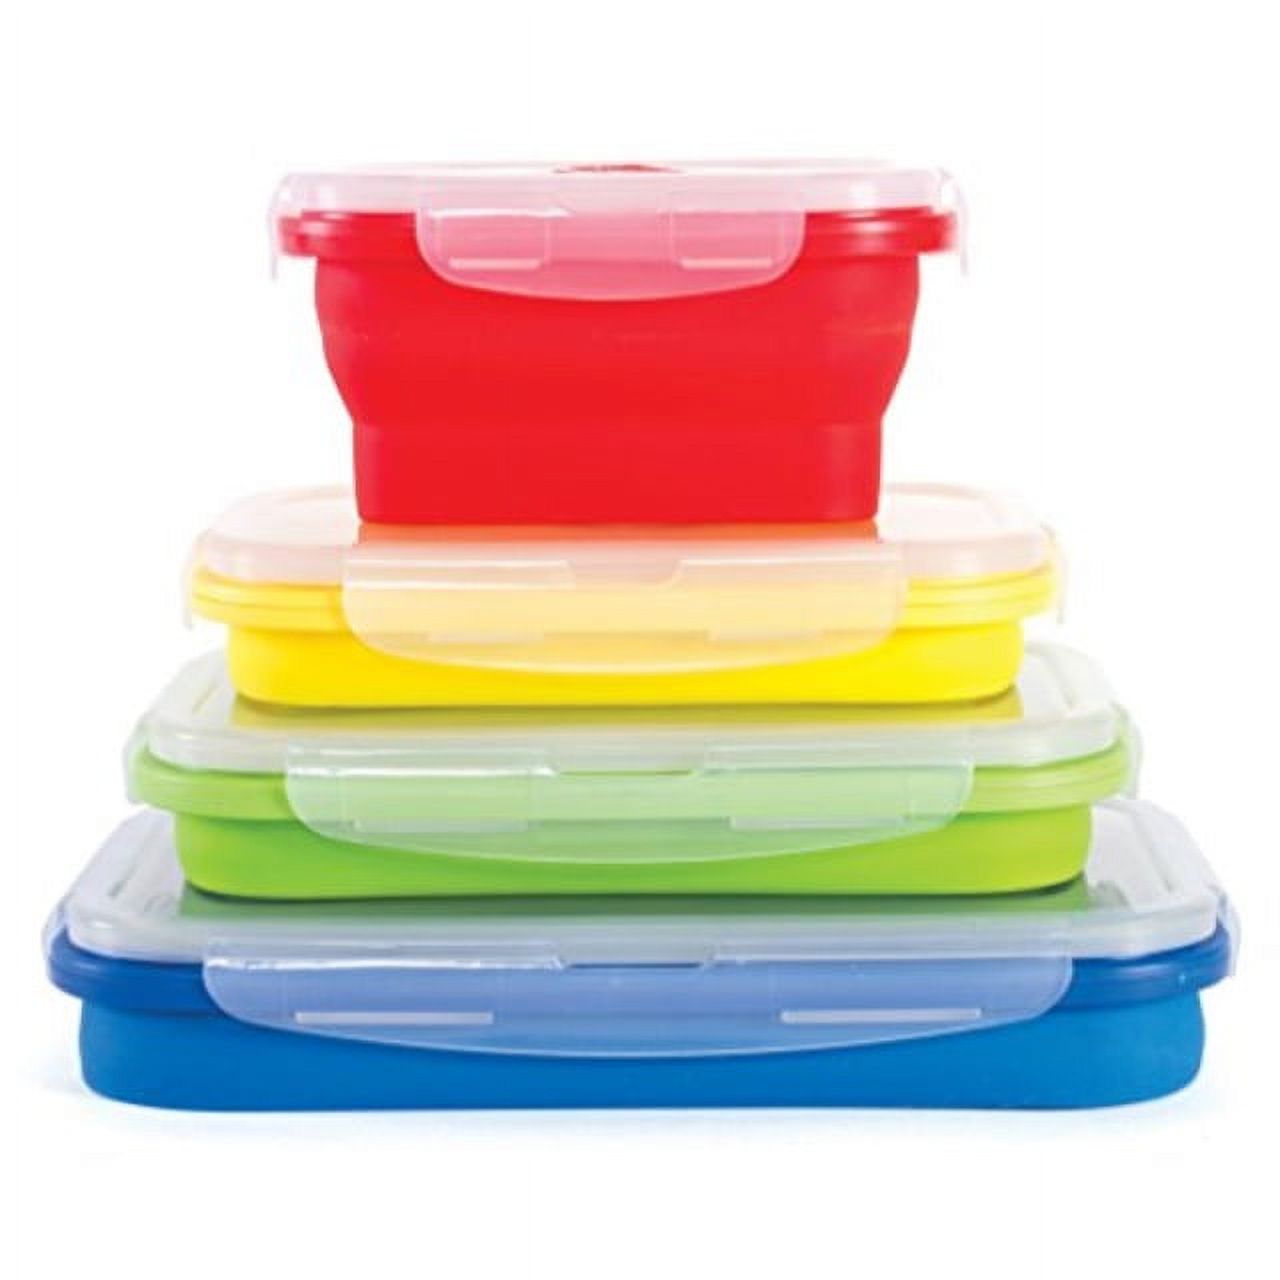 Thin Bins Collapsible Containers Set of 4 Rectangle Silicone Food Storage Containers BPA Free, Microwave, Dishwasher Safe - image 1 of 8